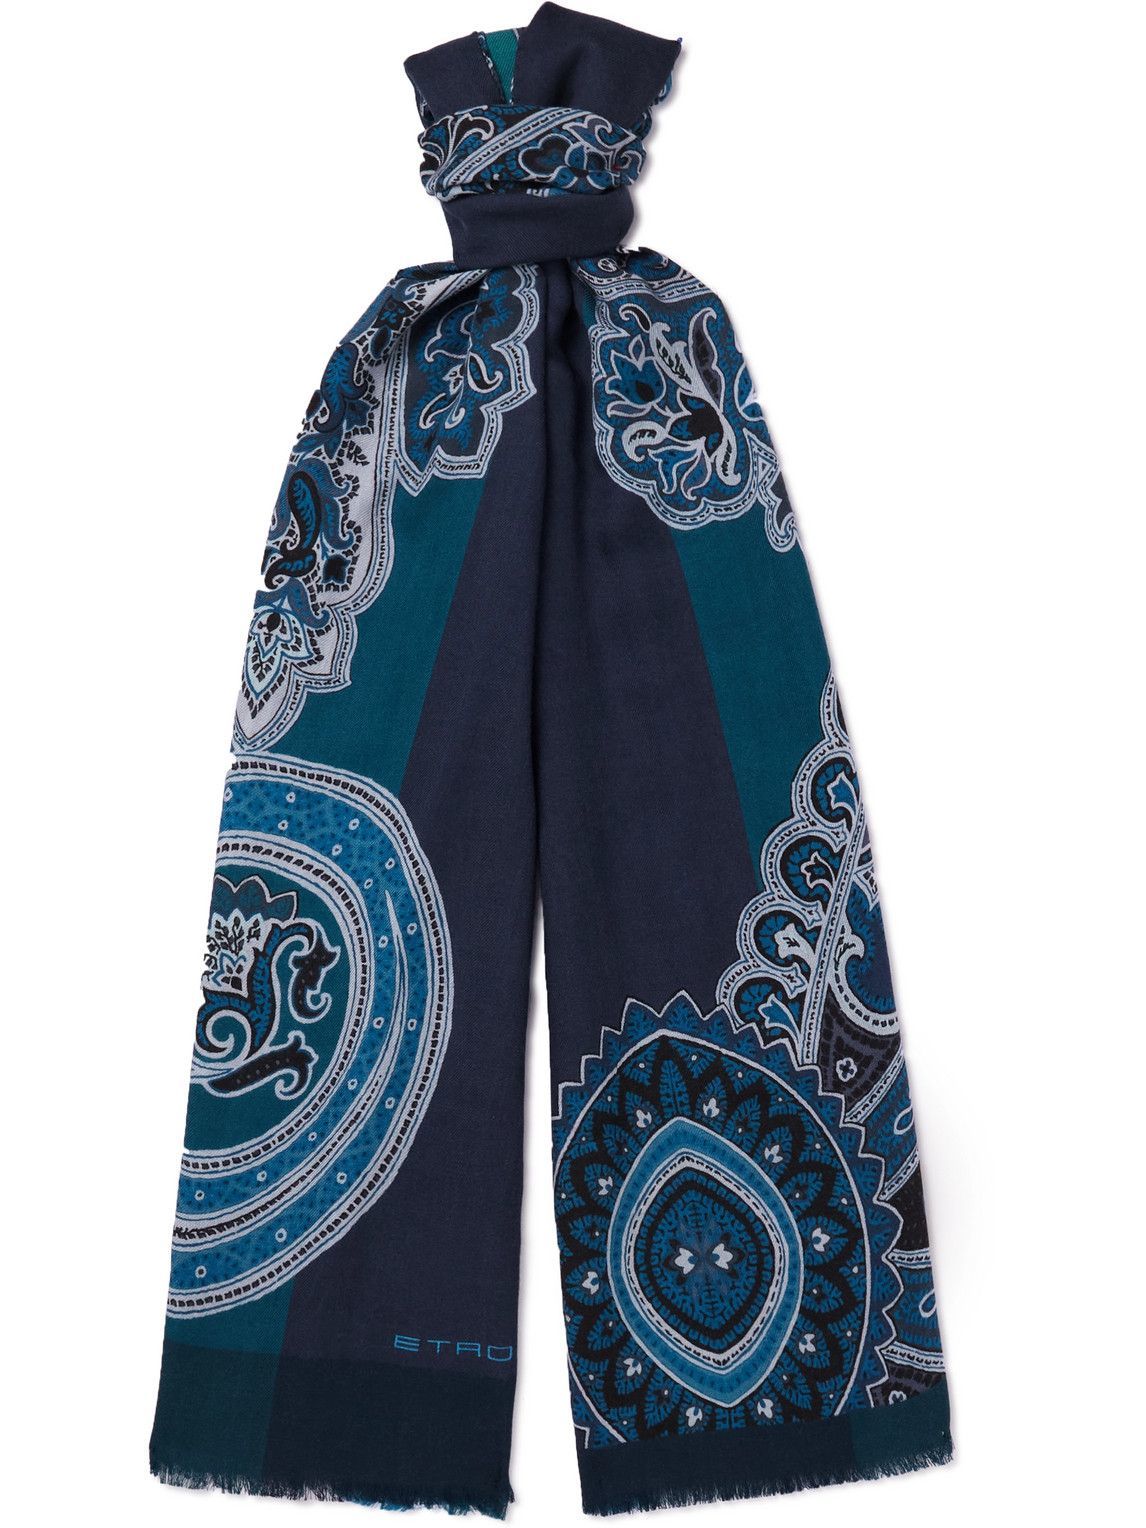 Photo: Etro - Fringed Printed Wool and Silk-Blend Twill Scarf